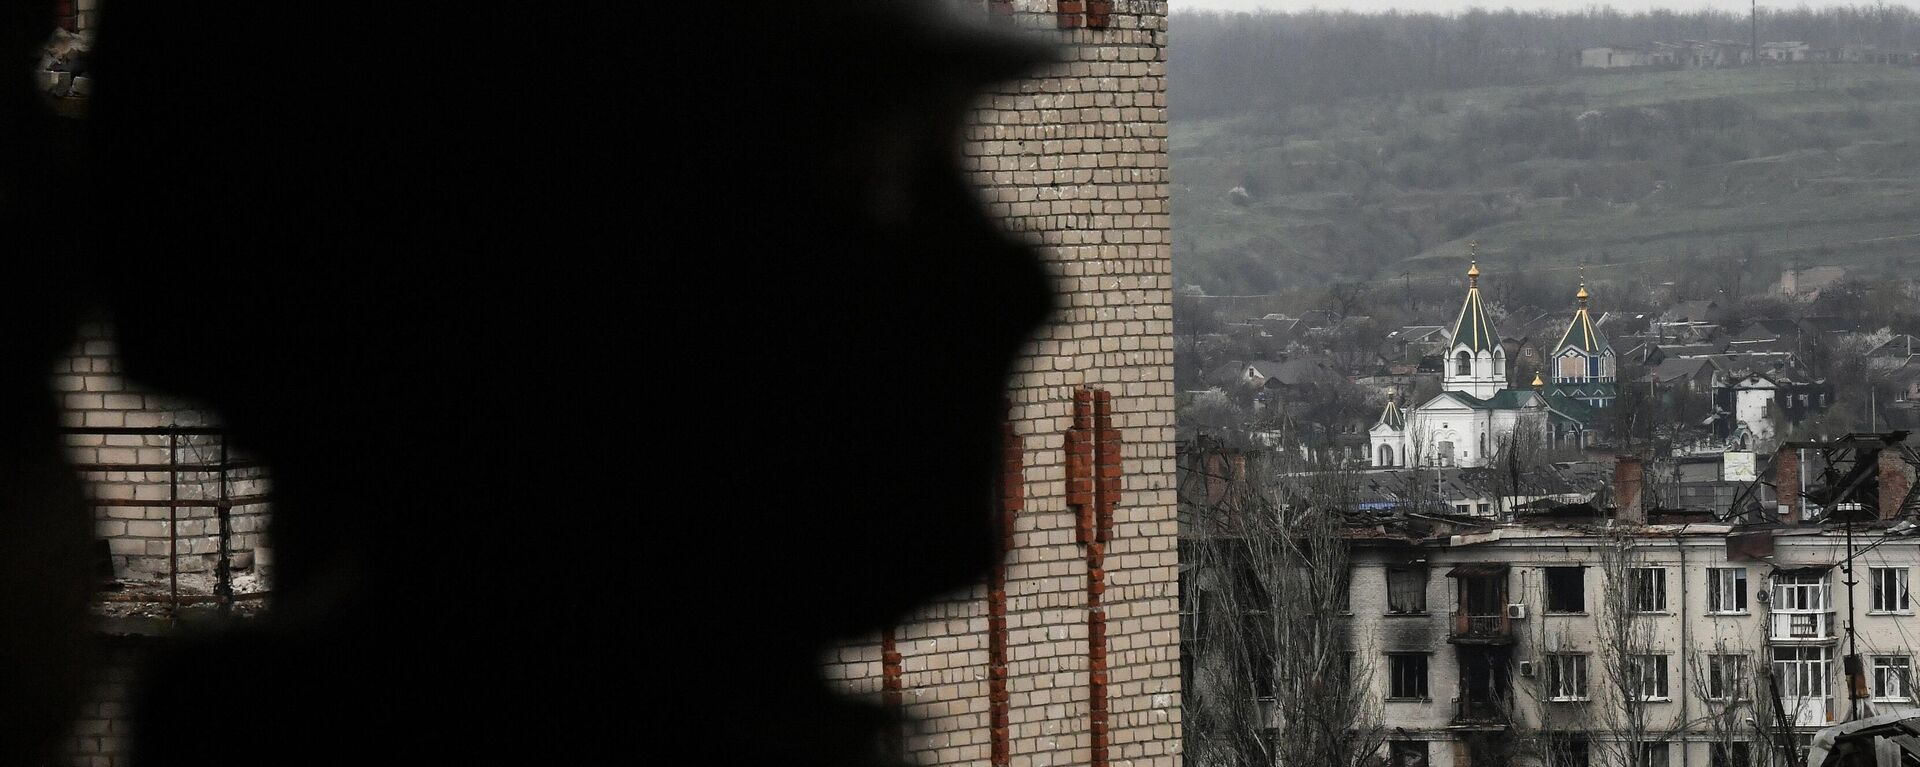 A service member of Russia's private military company Wagner Group inspects a building in Artemovsk, also known as Bakhmut, as Russia's military operation in Ukraine continues, Donetsk People's Republic, Russia. - Sputnik International, 1920, 21.05.2023